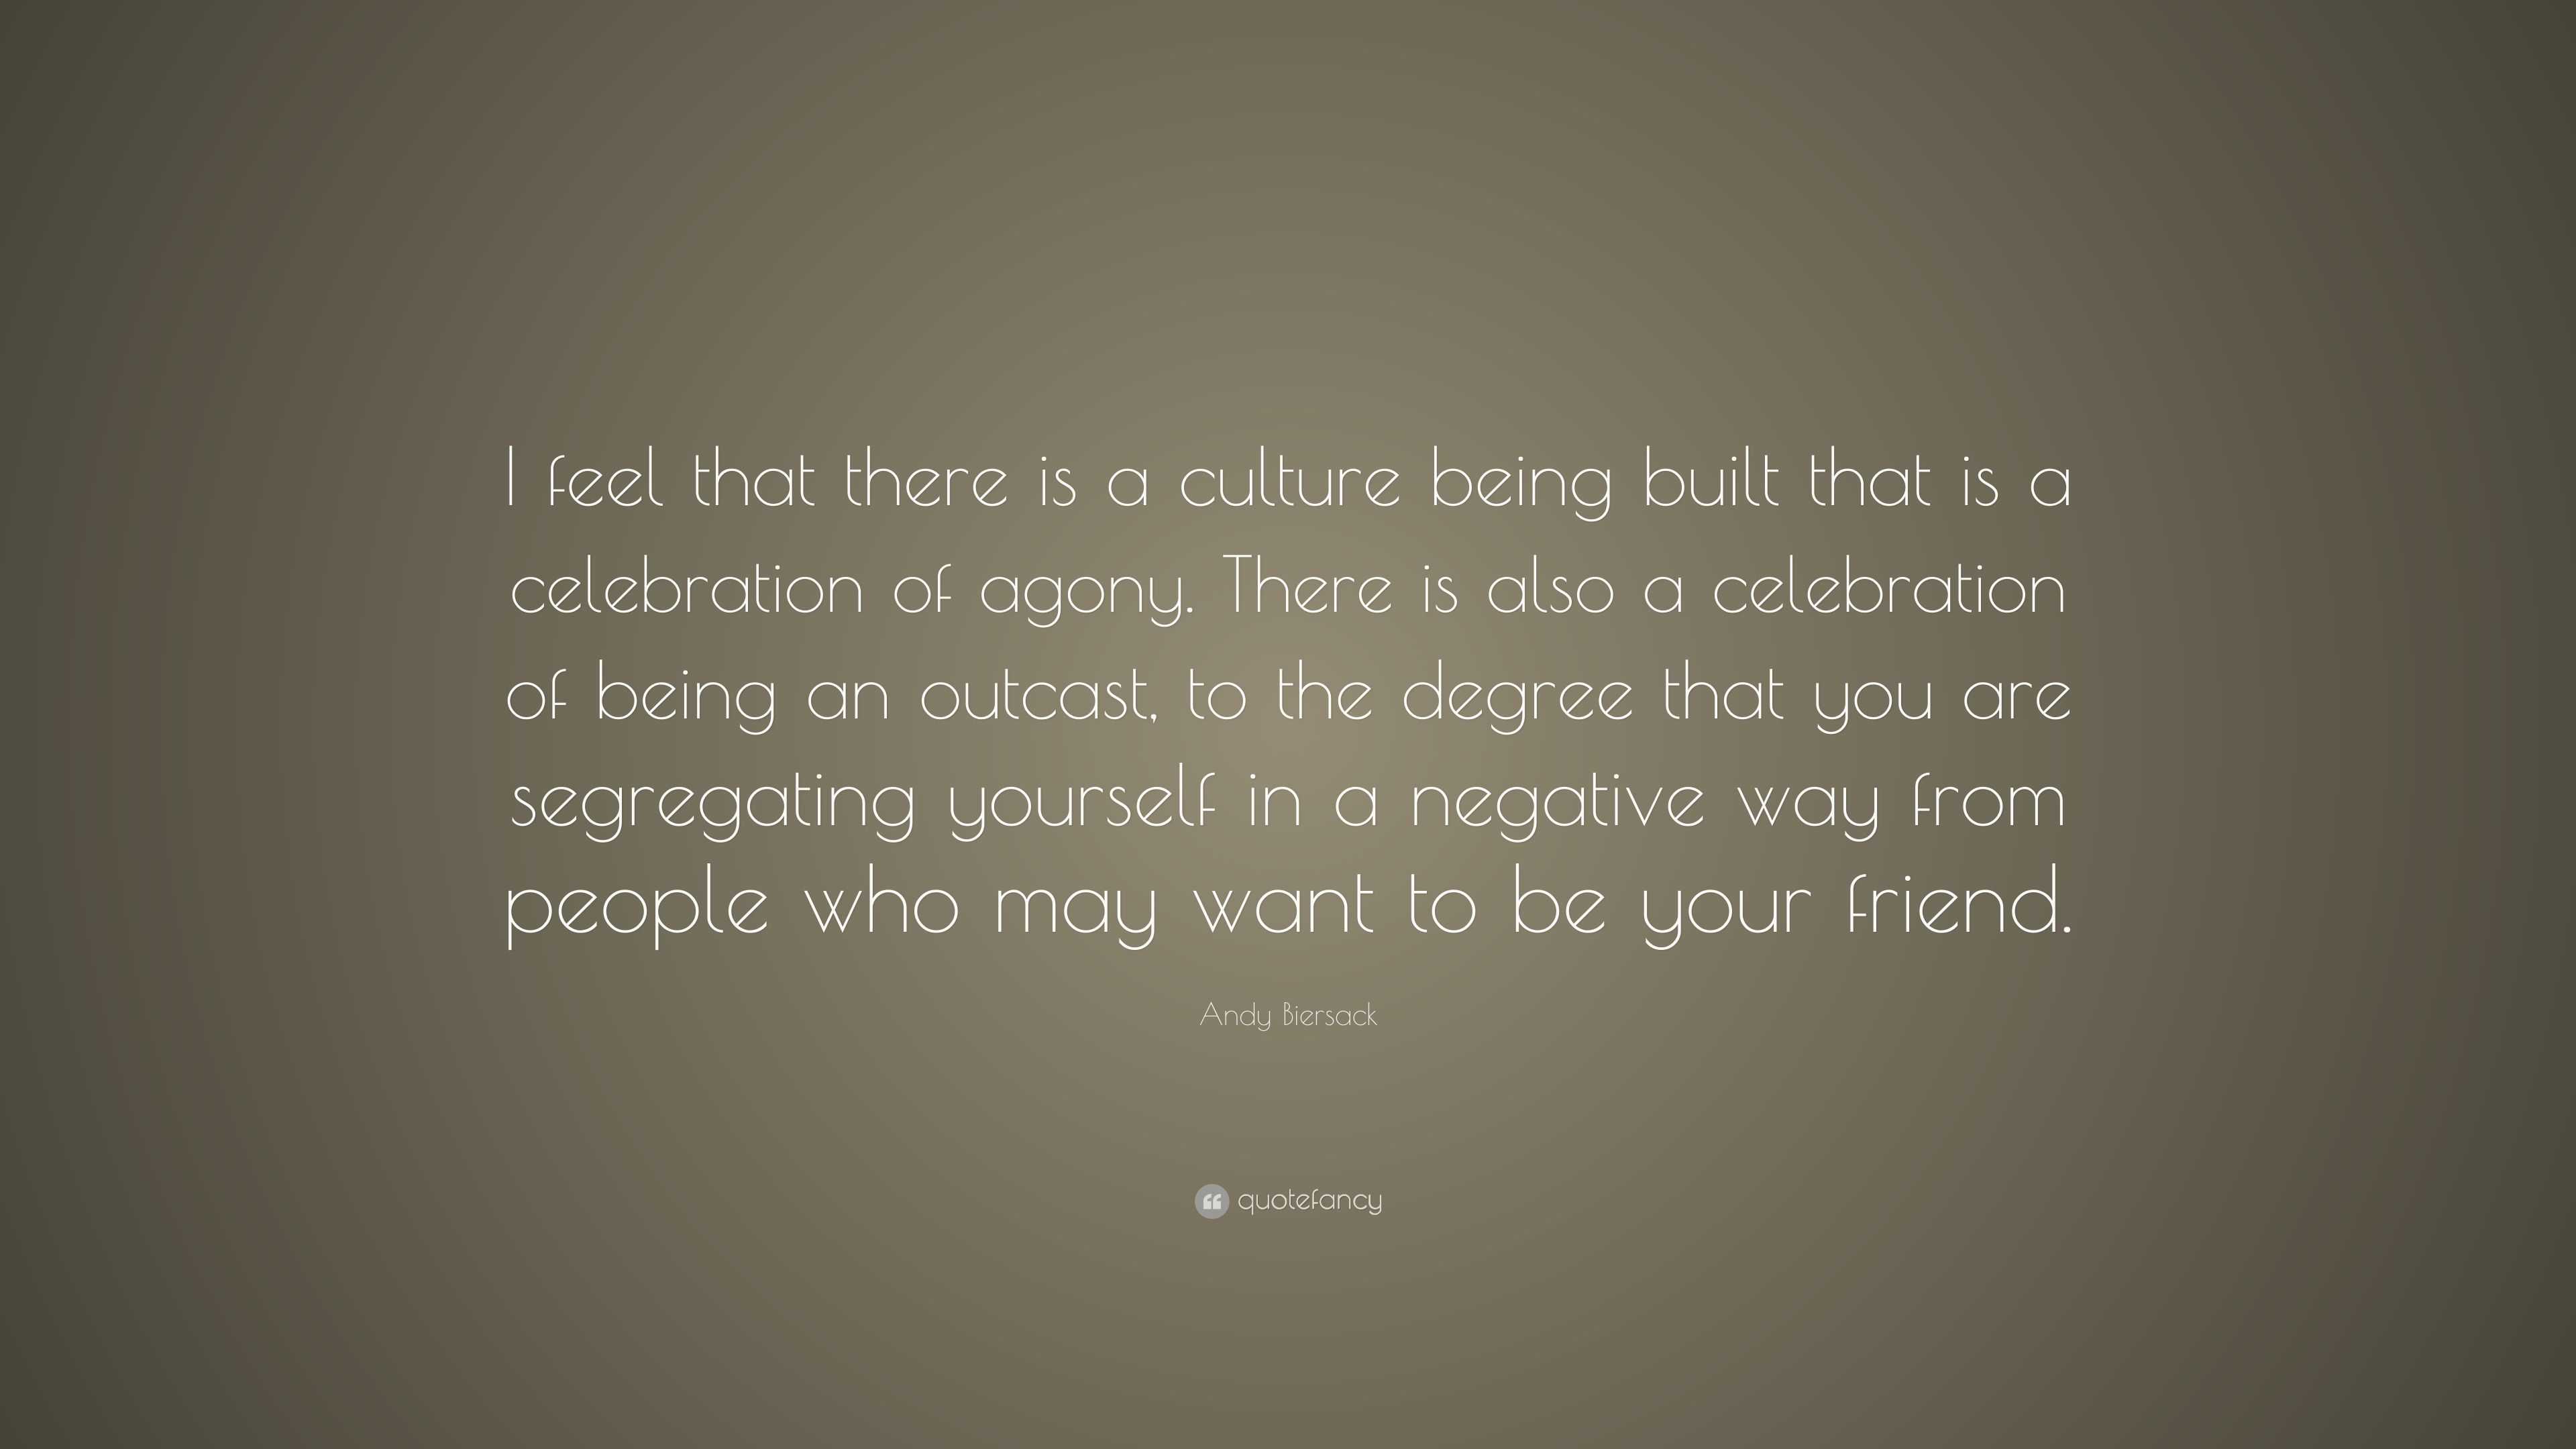 Andy Biersack Quote: “I feel that there is a culture being built that ...